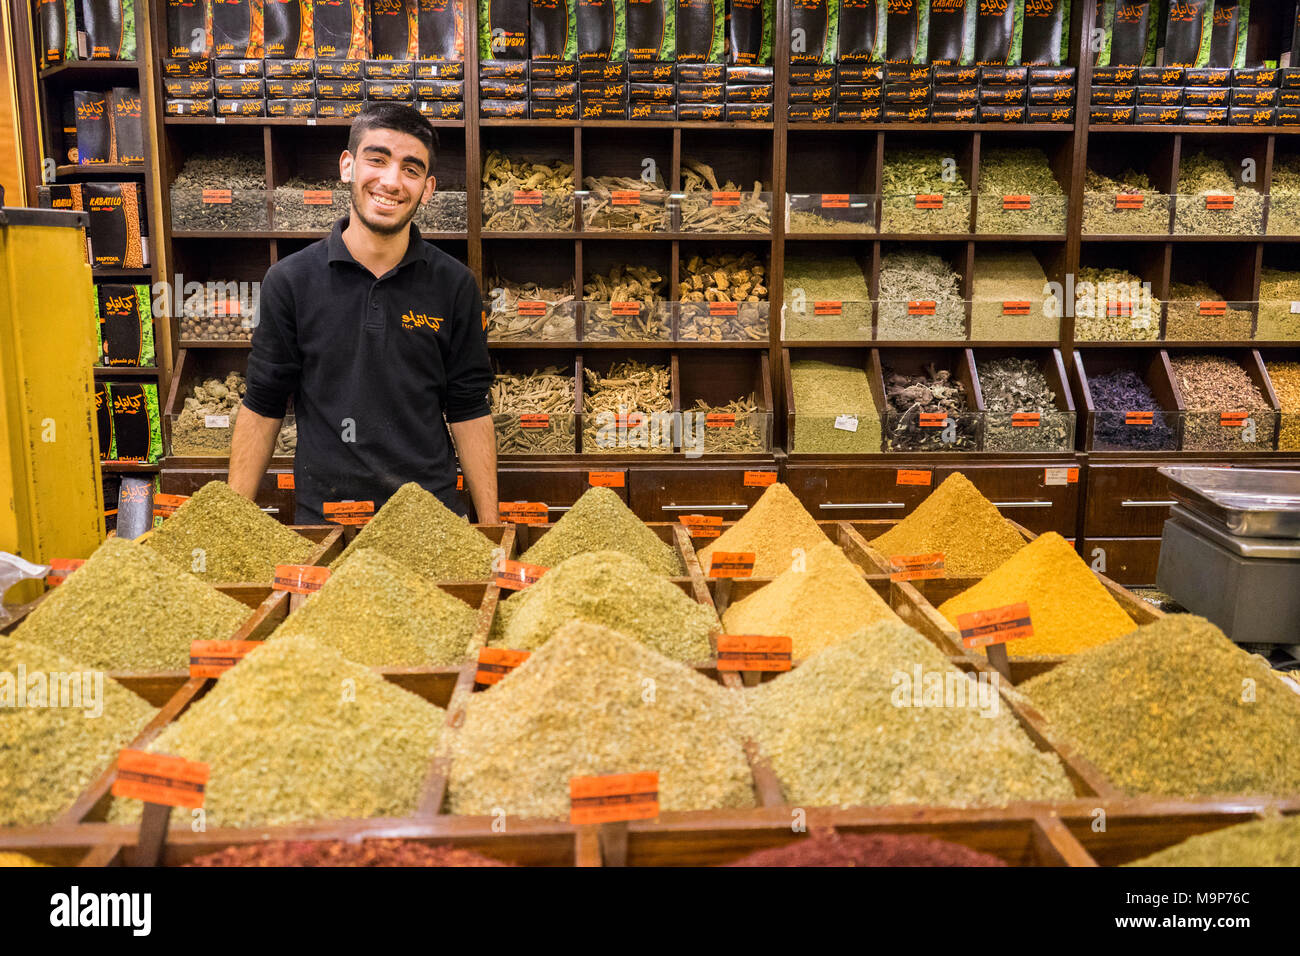 A man sells spices, herbs, nuts and Egyptian duqqa in a Spice Market in Amman, Jordan Stock Photo